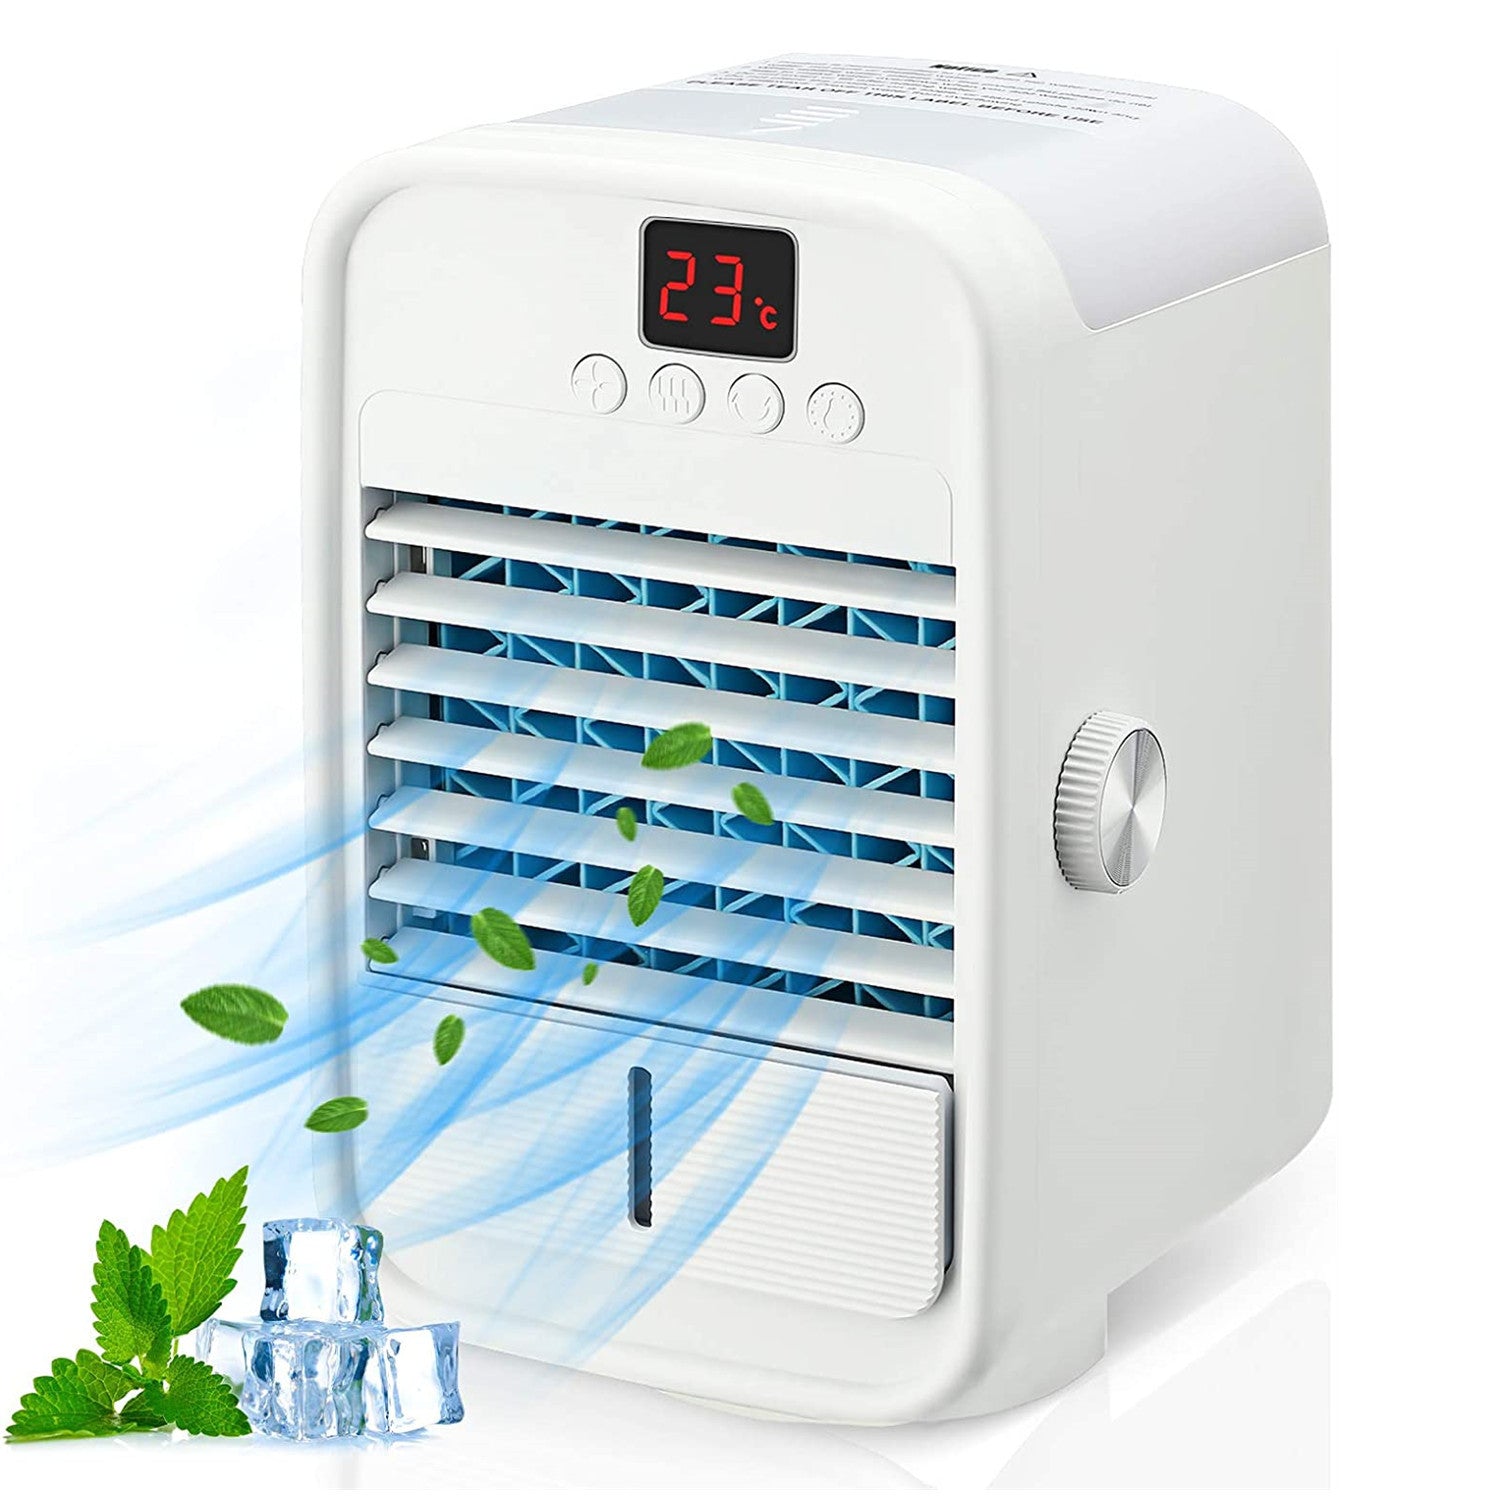 Portable Air Conditioner Fan, 3-IN-1 Evaporative Air Cooler, Portable Fan/Humidifier/Cooling Oscillating Fan with 350ml Water Box, Ultra-quiet (6.10"L x 5.00"W x 8.80H)